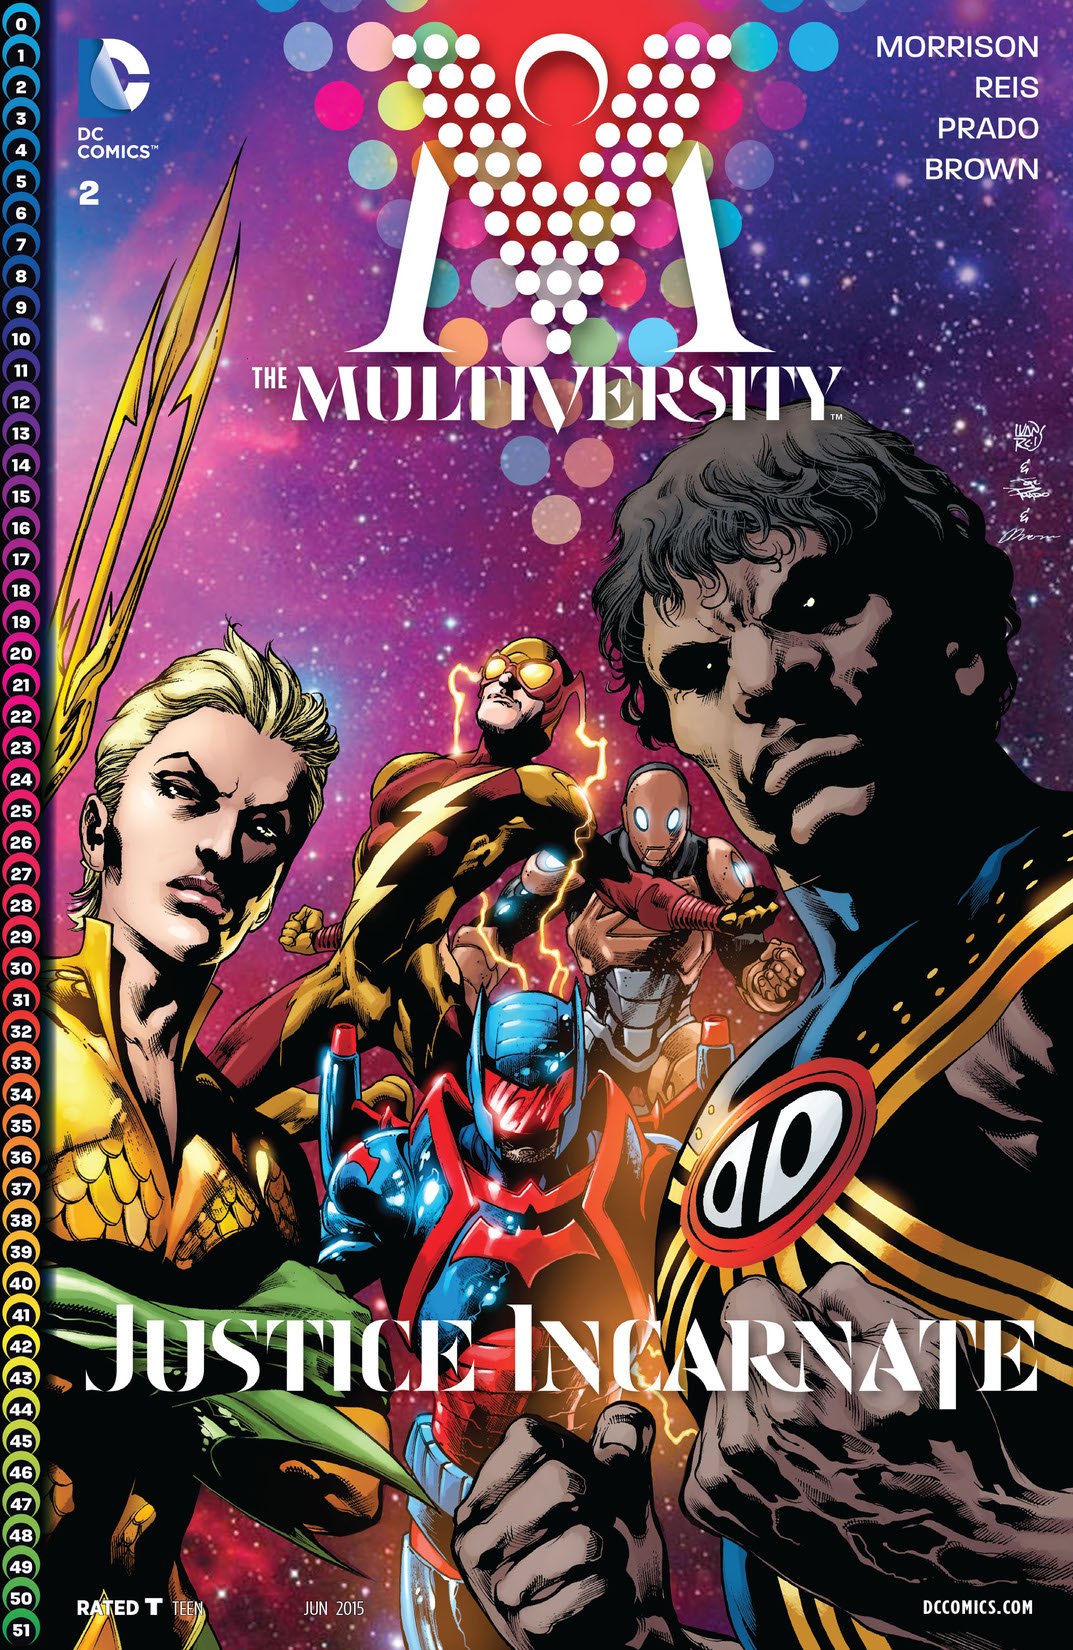 The Multiversity #2 preview images